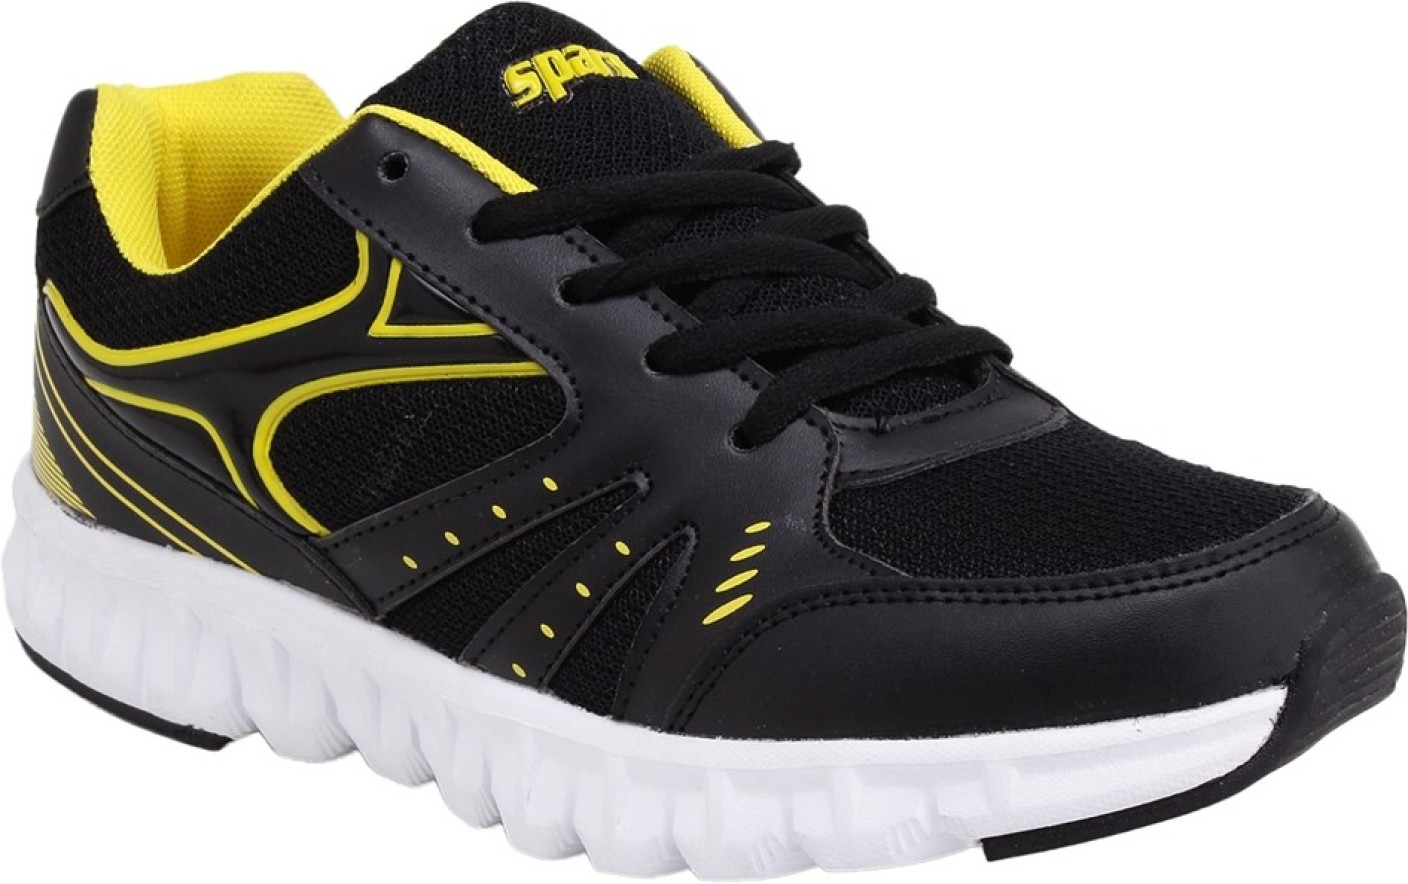 Sparx Trendy Black Yellow Running Shoes For Women - Buy Black Color ...